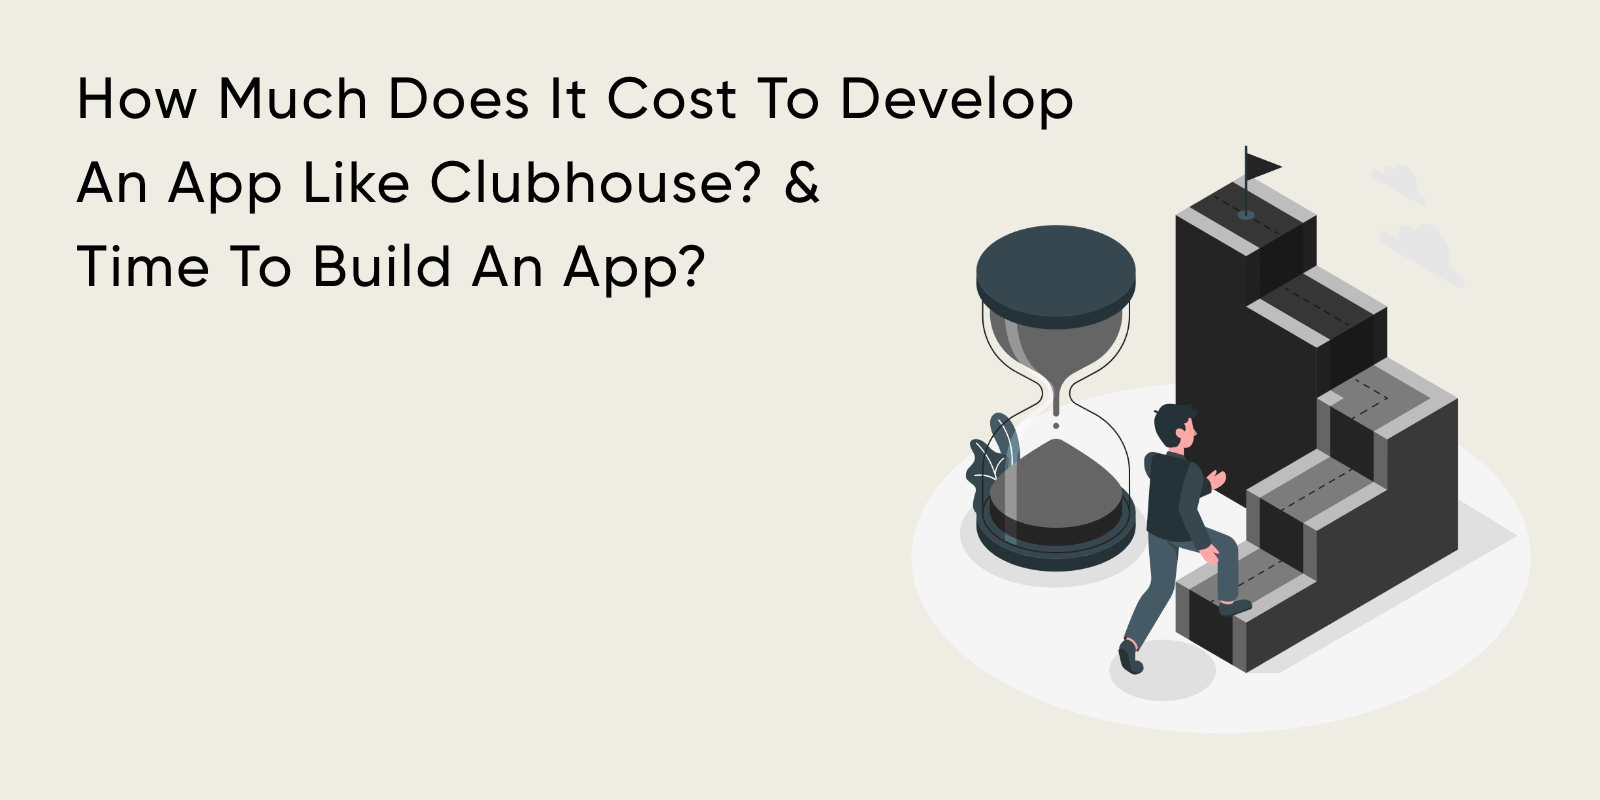 App like Clubhouse